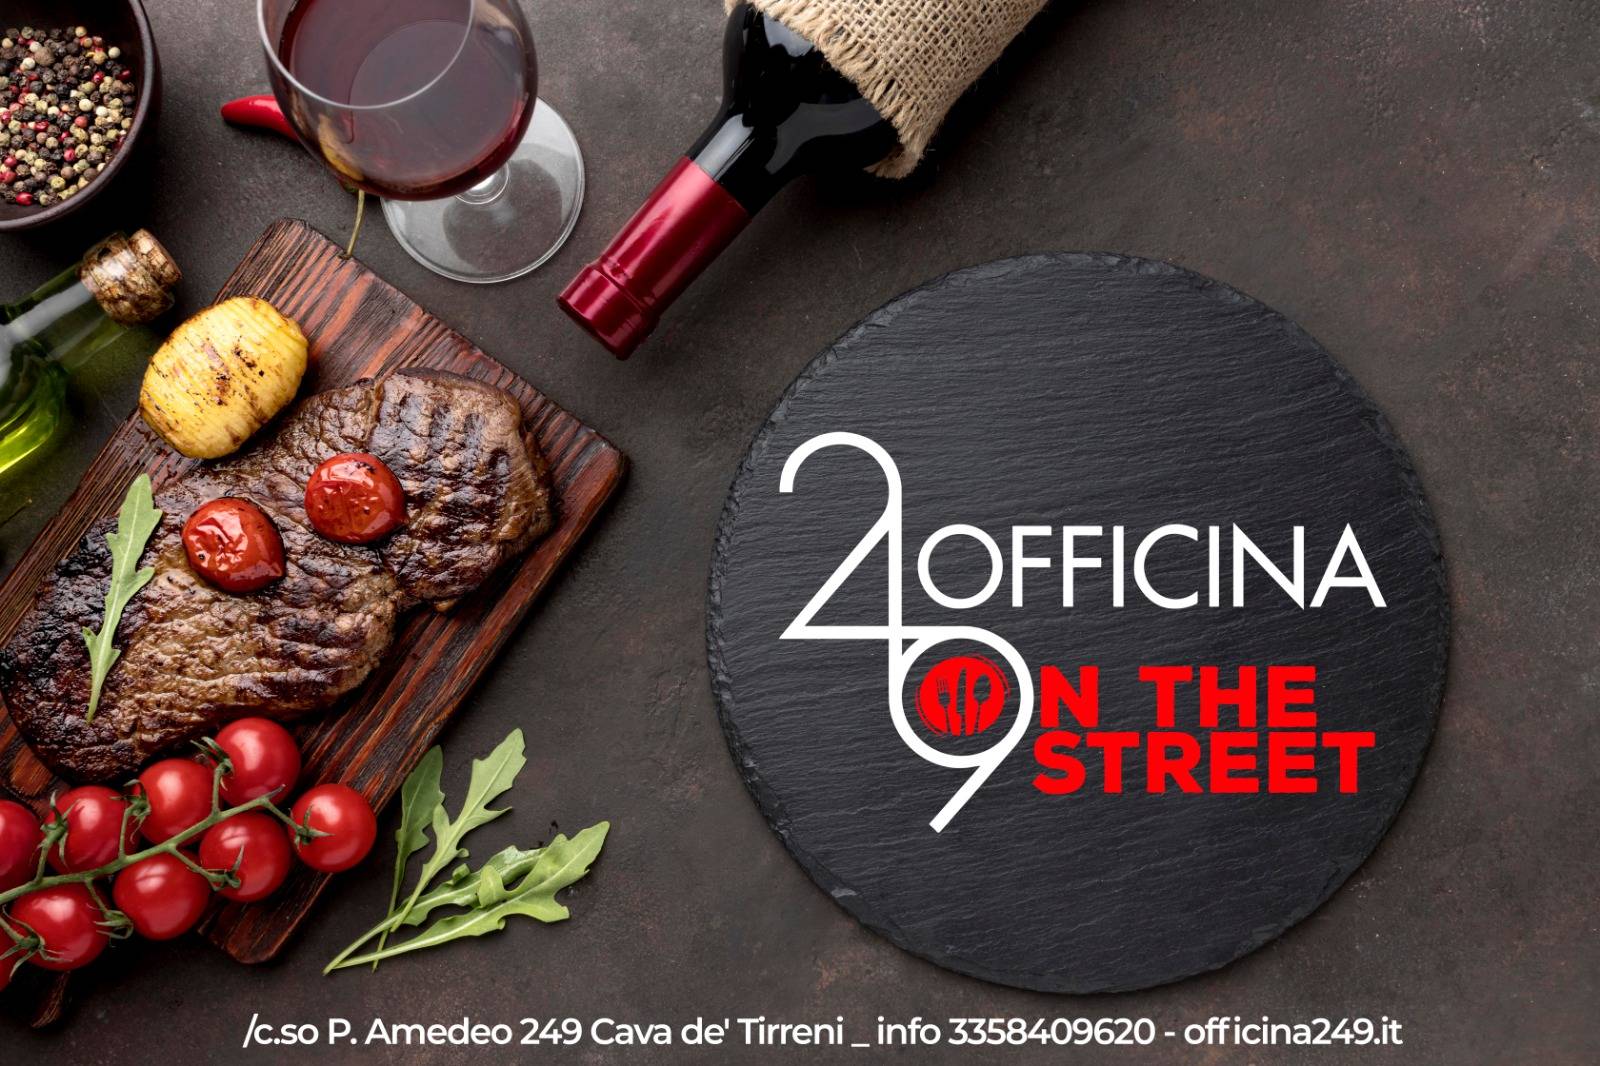 Officina 249 – On the Street